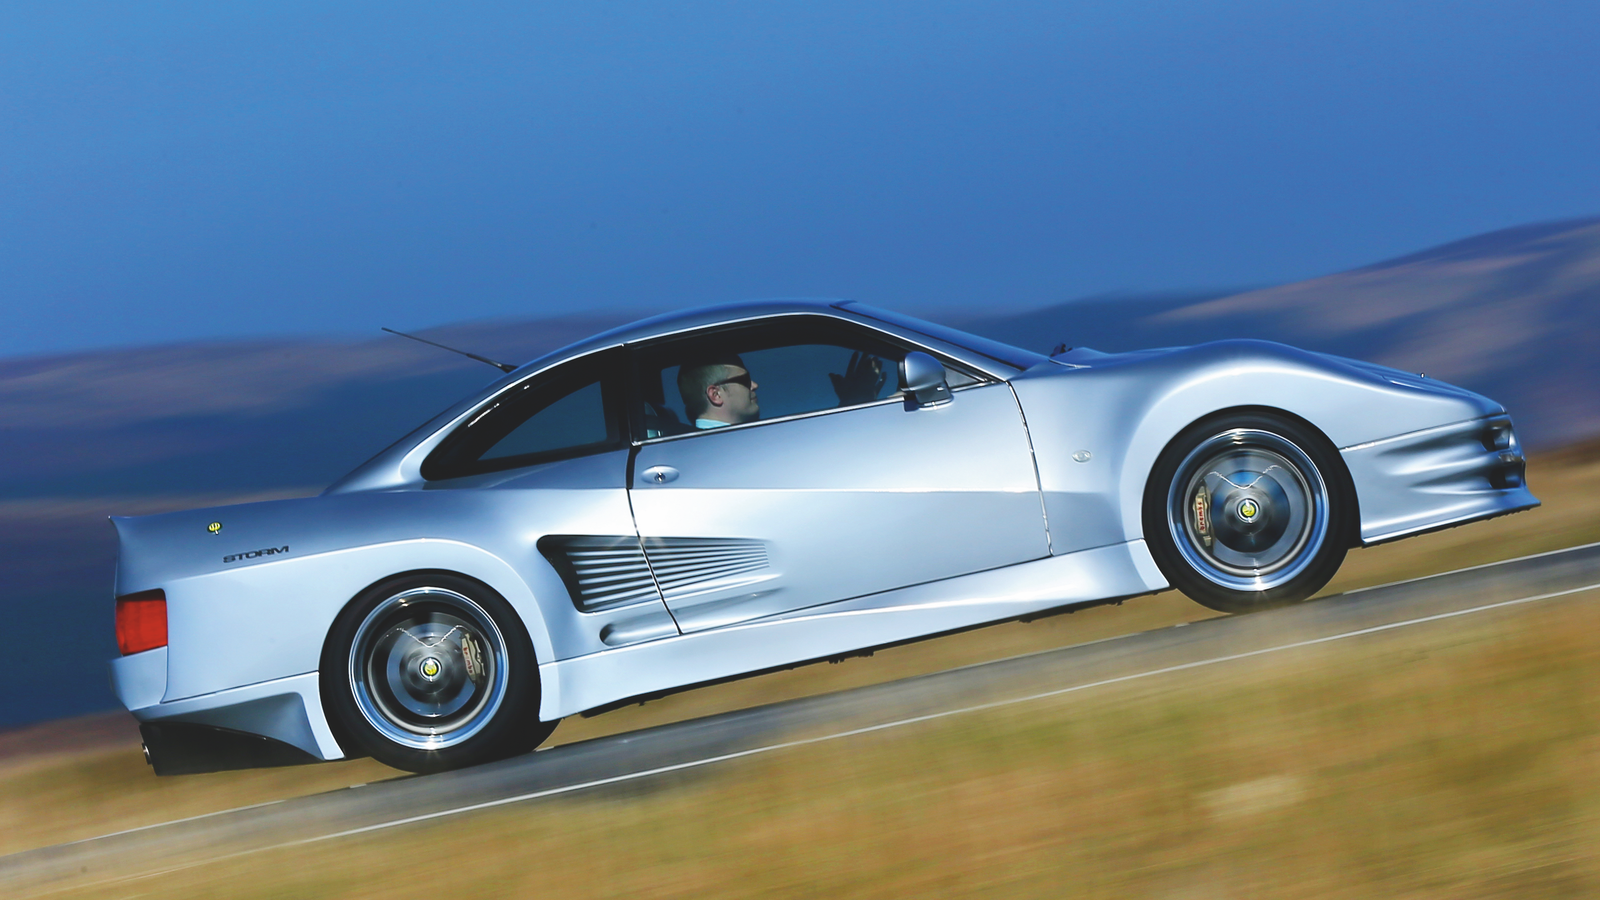 Meet the bonkers British supercar you've never heard of